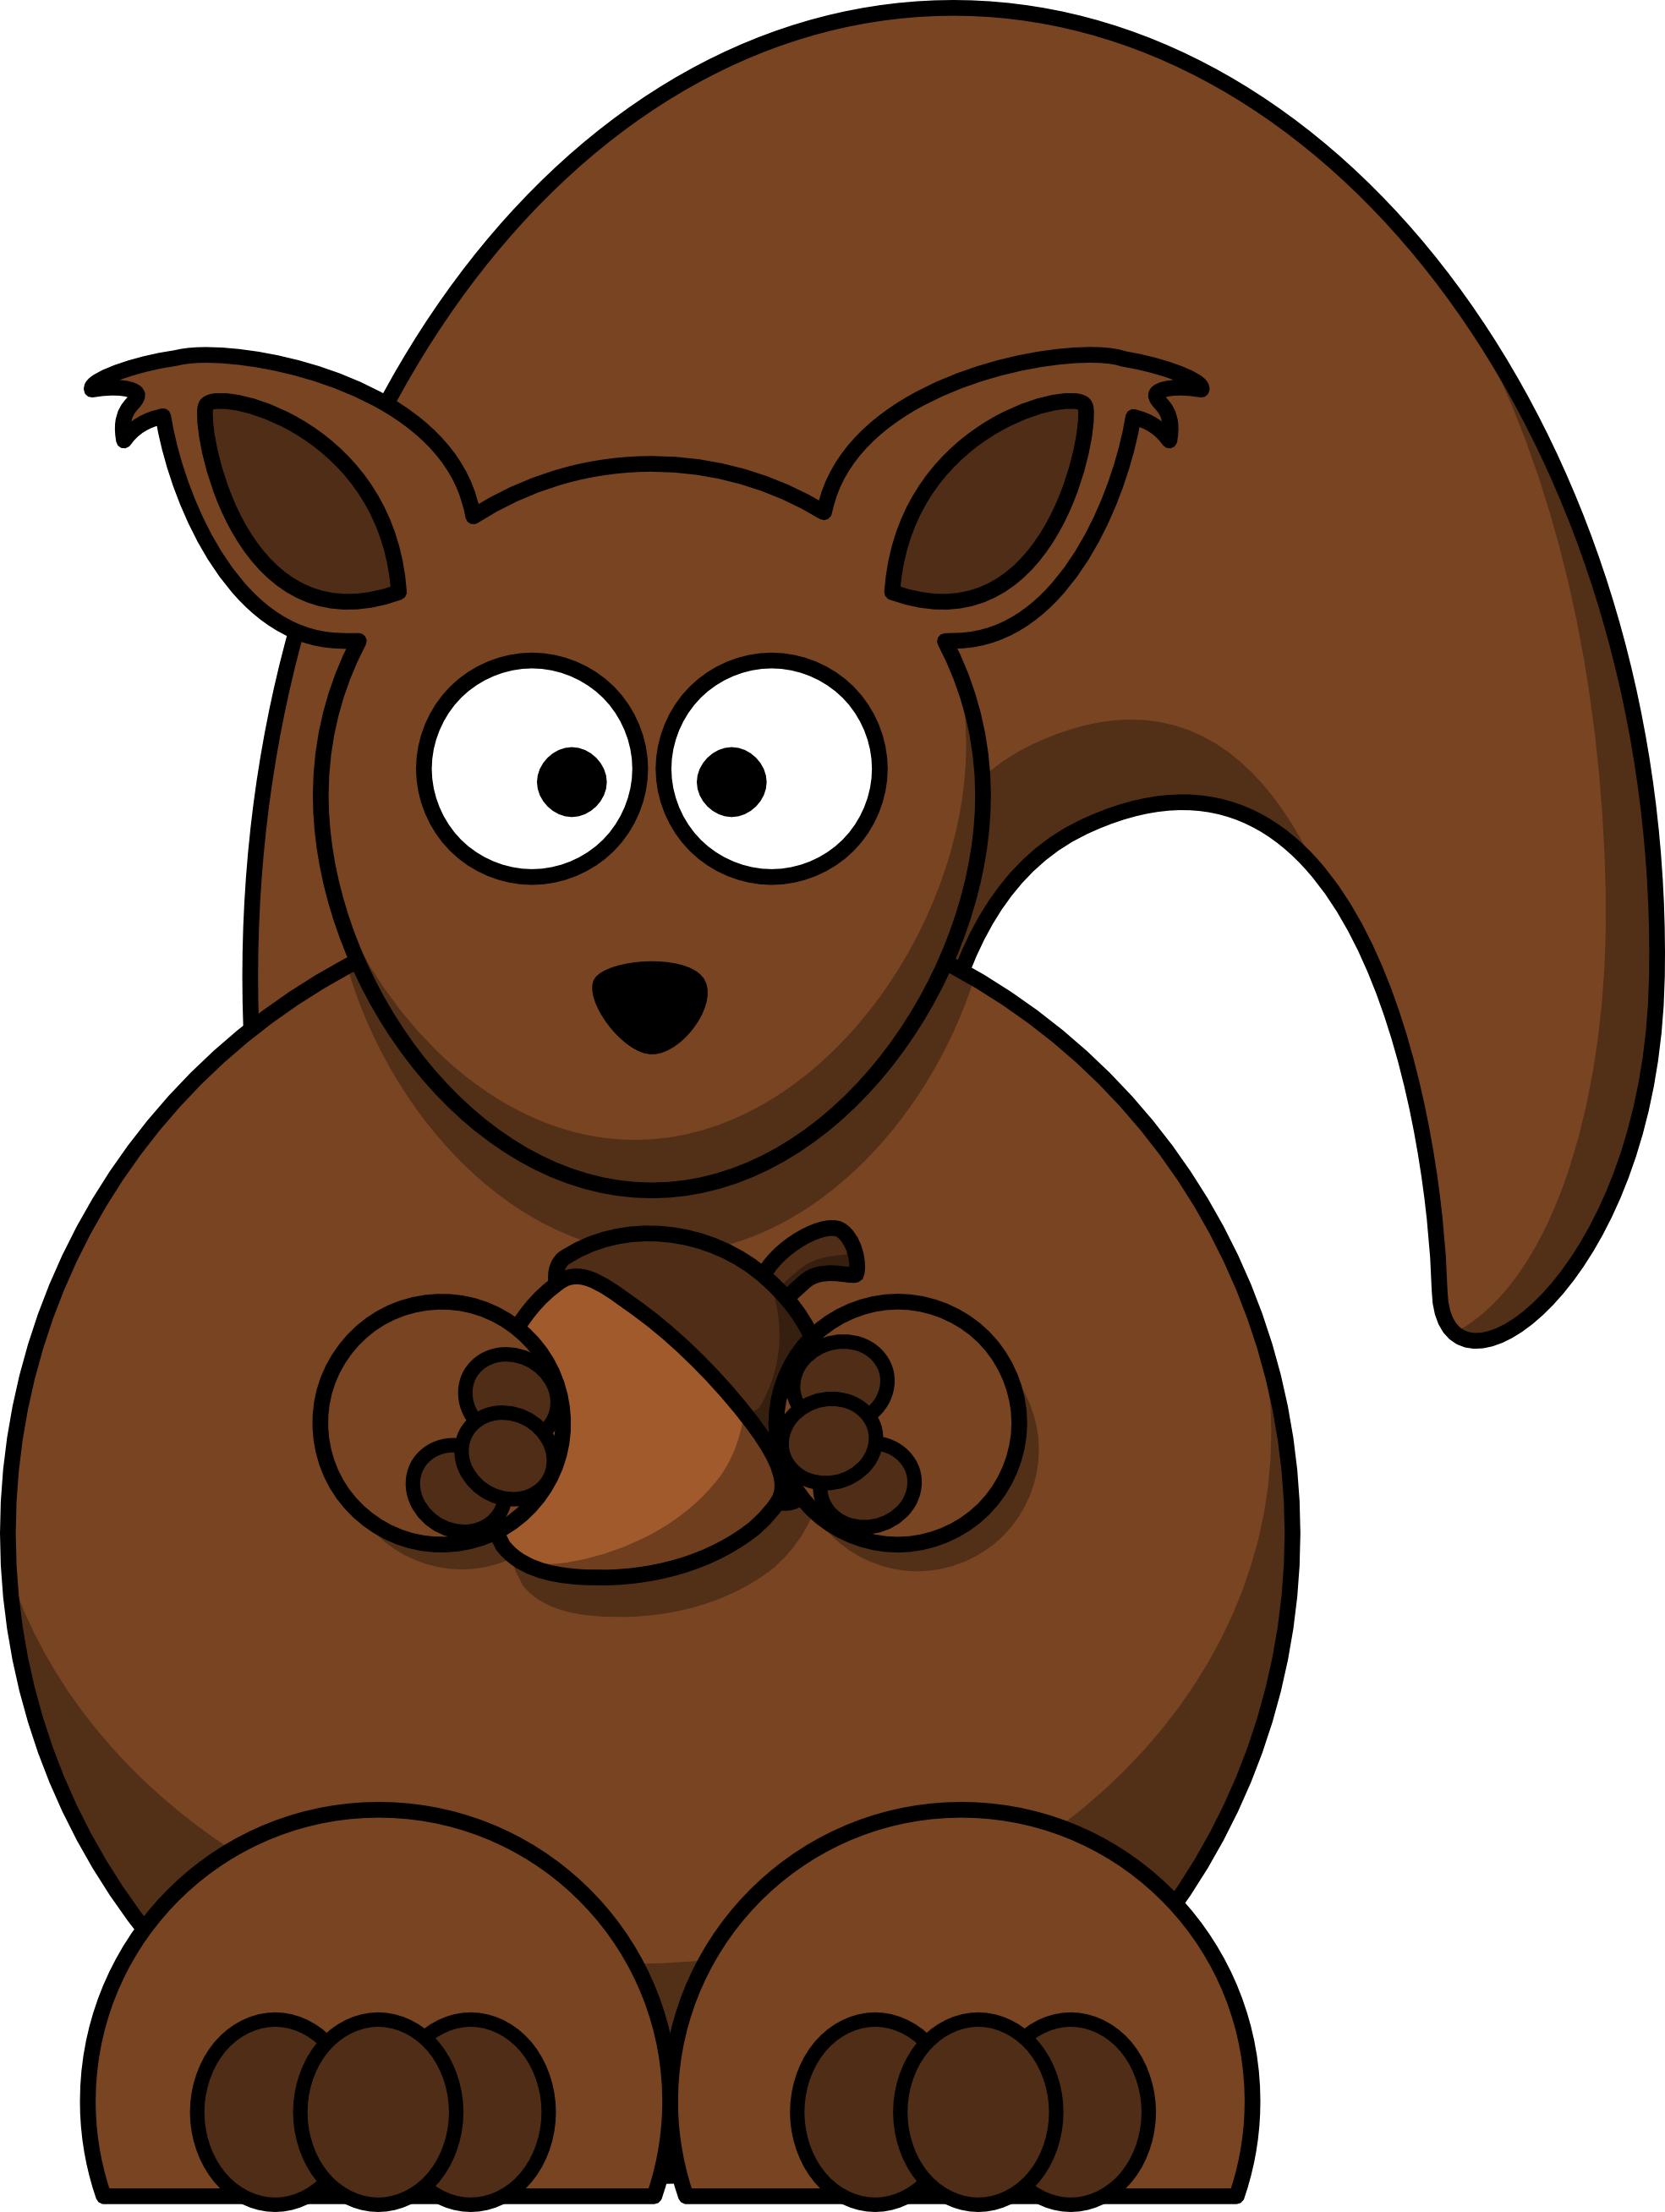 Squirrel In Tree Clipart | Clipart Panda - Free Clipart Images